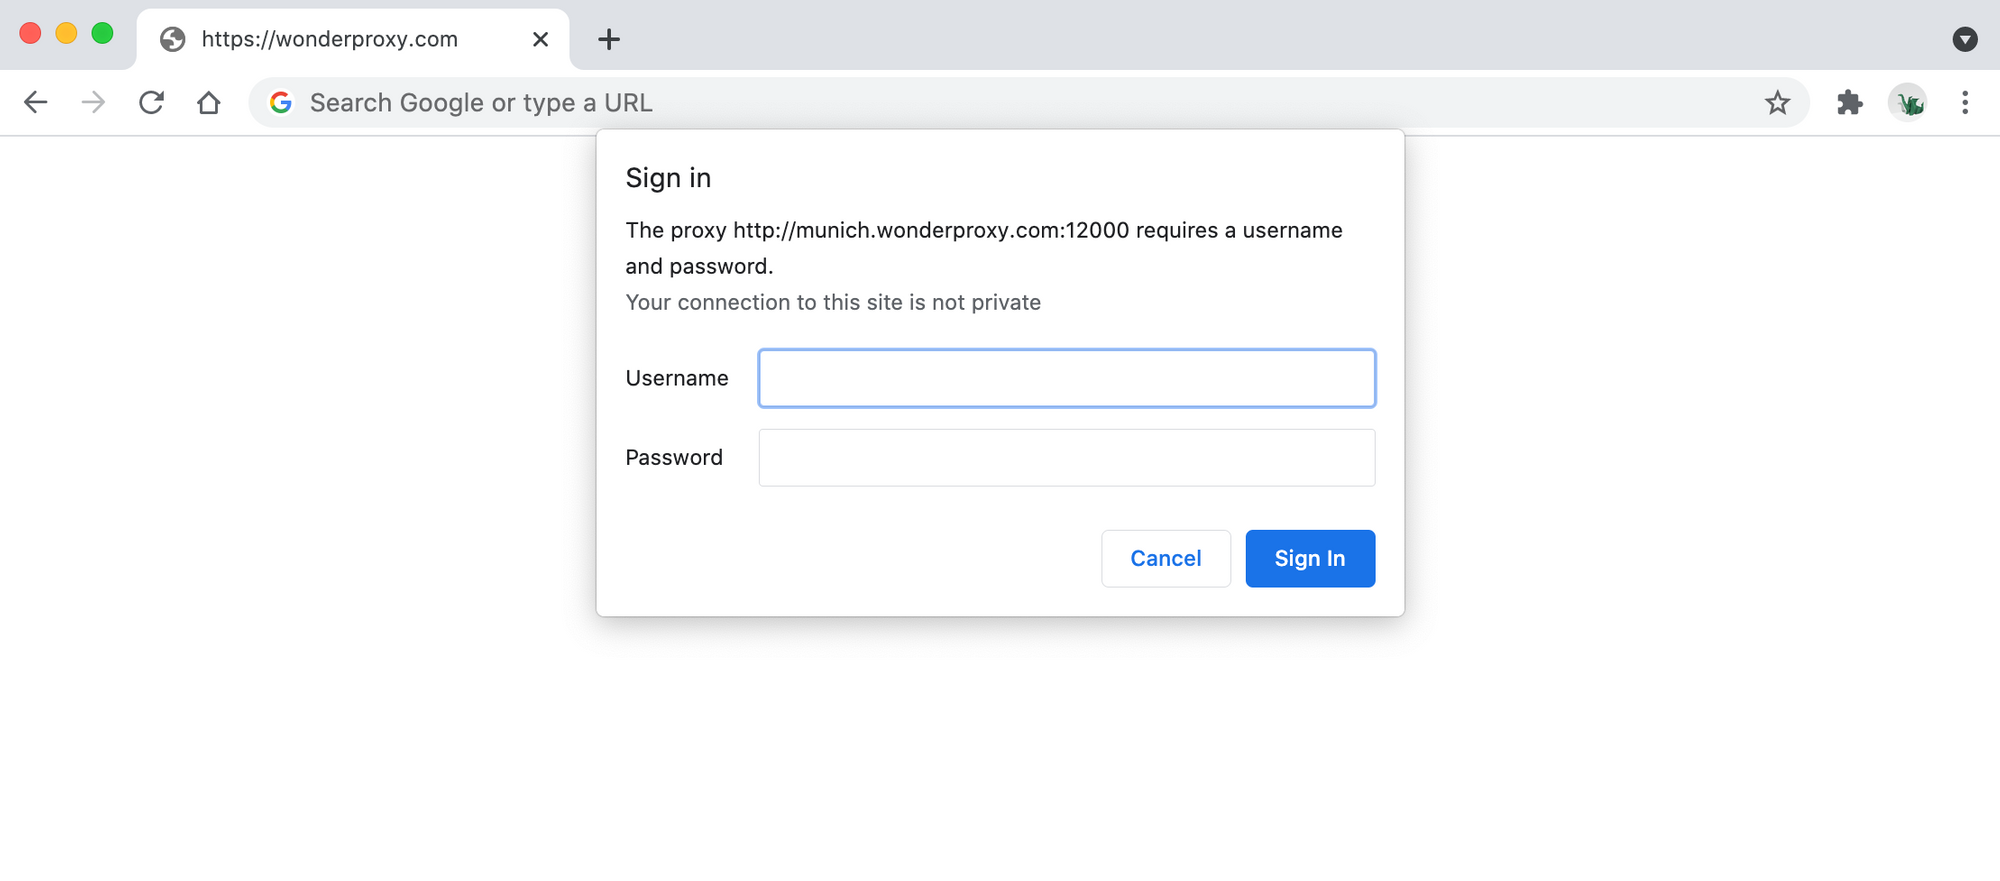 Prompt in Google Chrome asking for proxy username & password